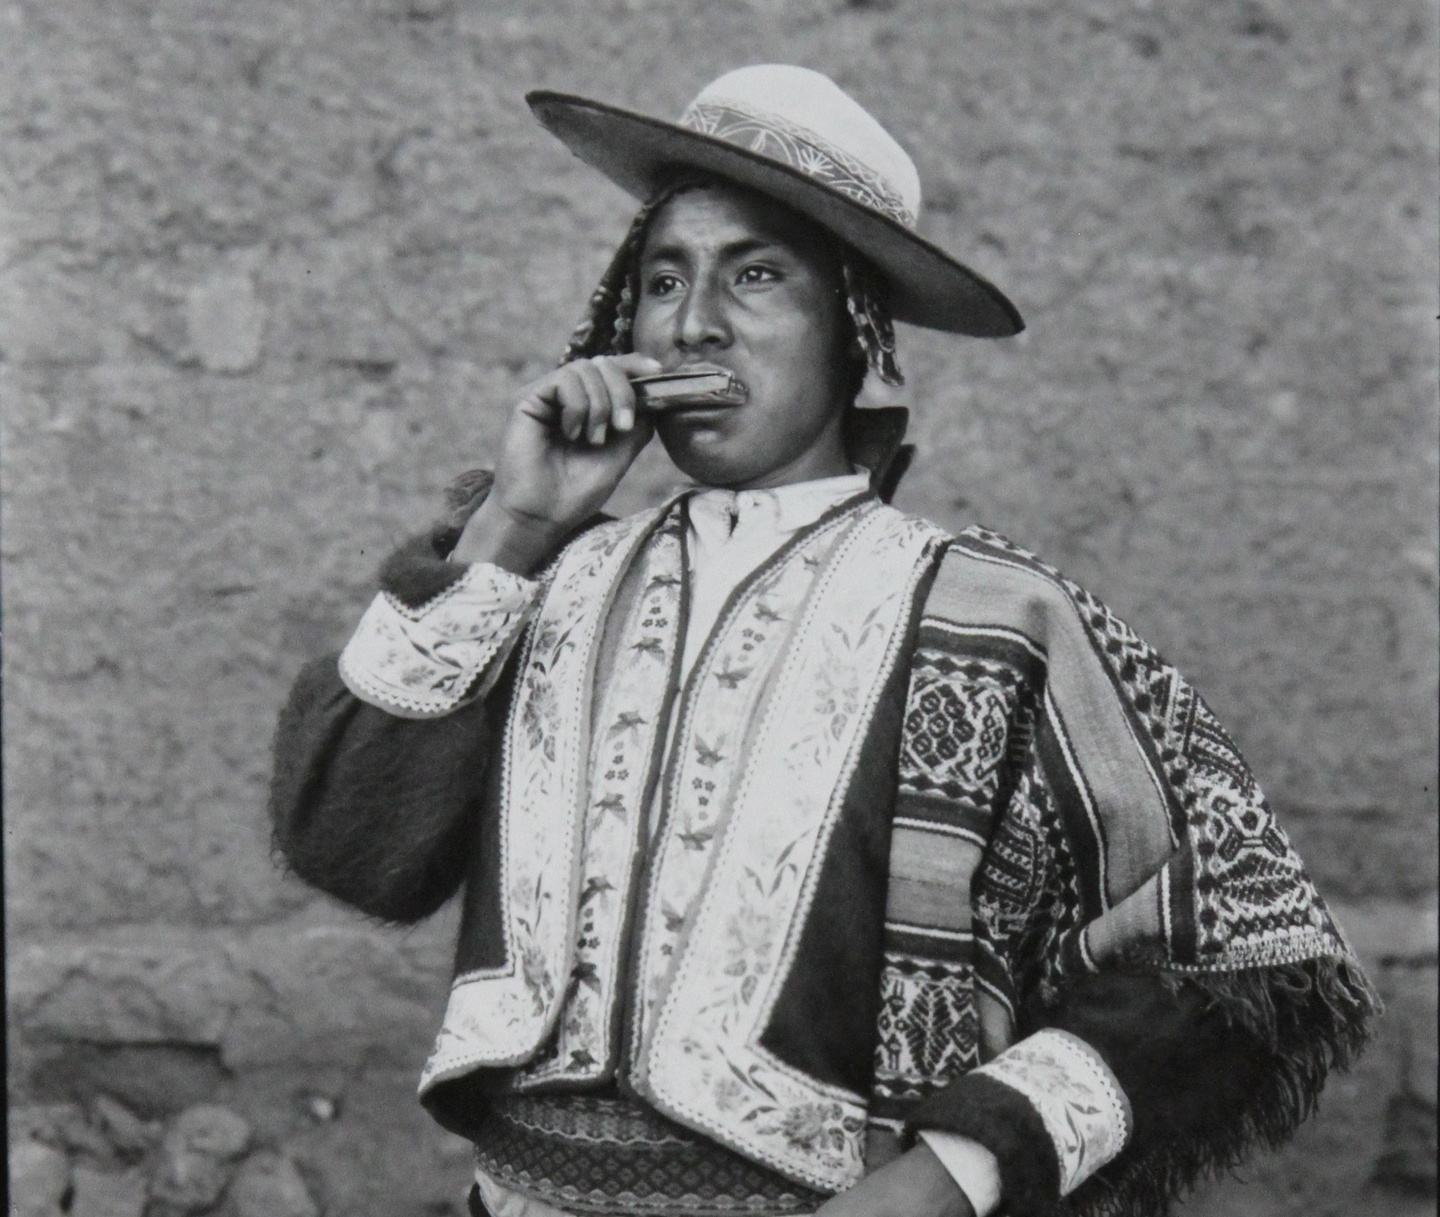 A photograph of a Peruvian man in indigenous dress blowing on a flute